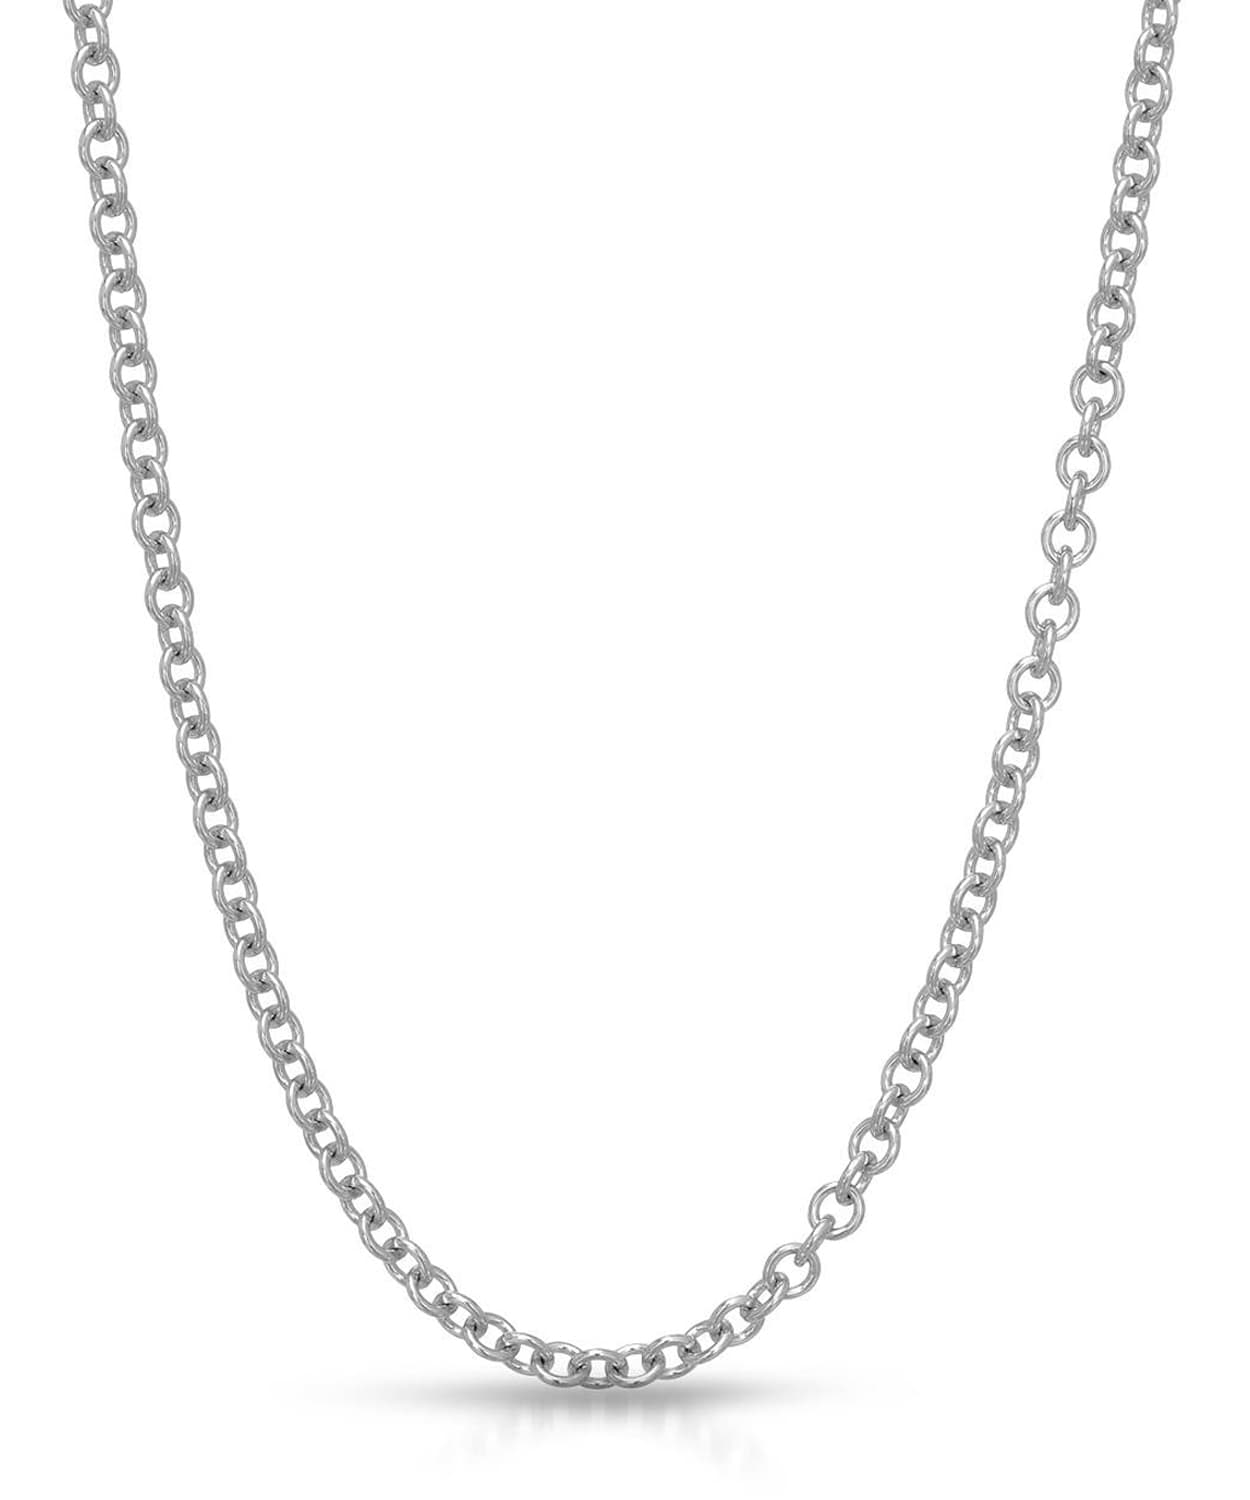 ESEMCO 2.5mm 14k Solid White Gold Rolo Chain View 1